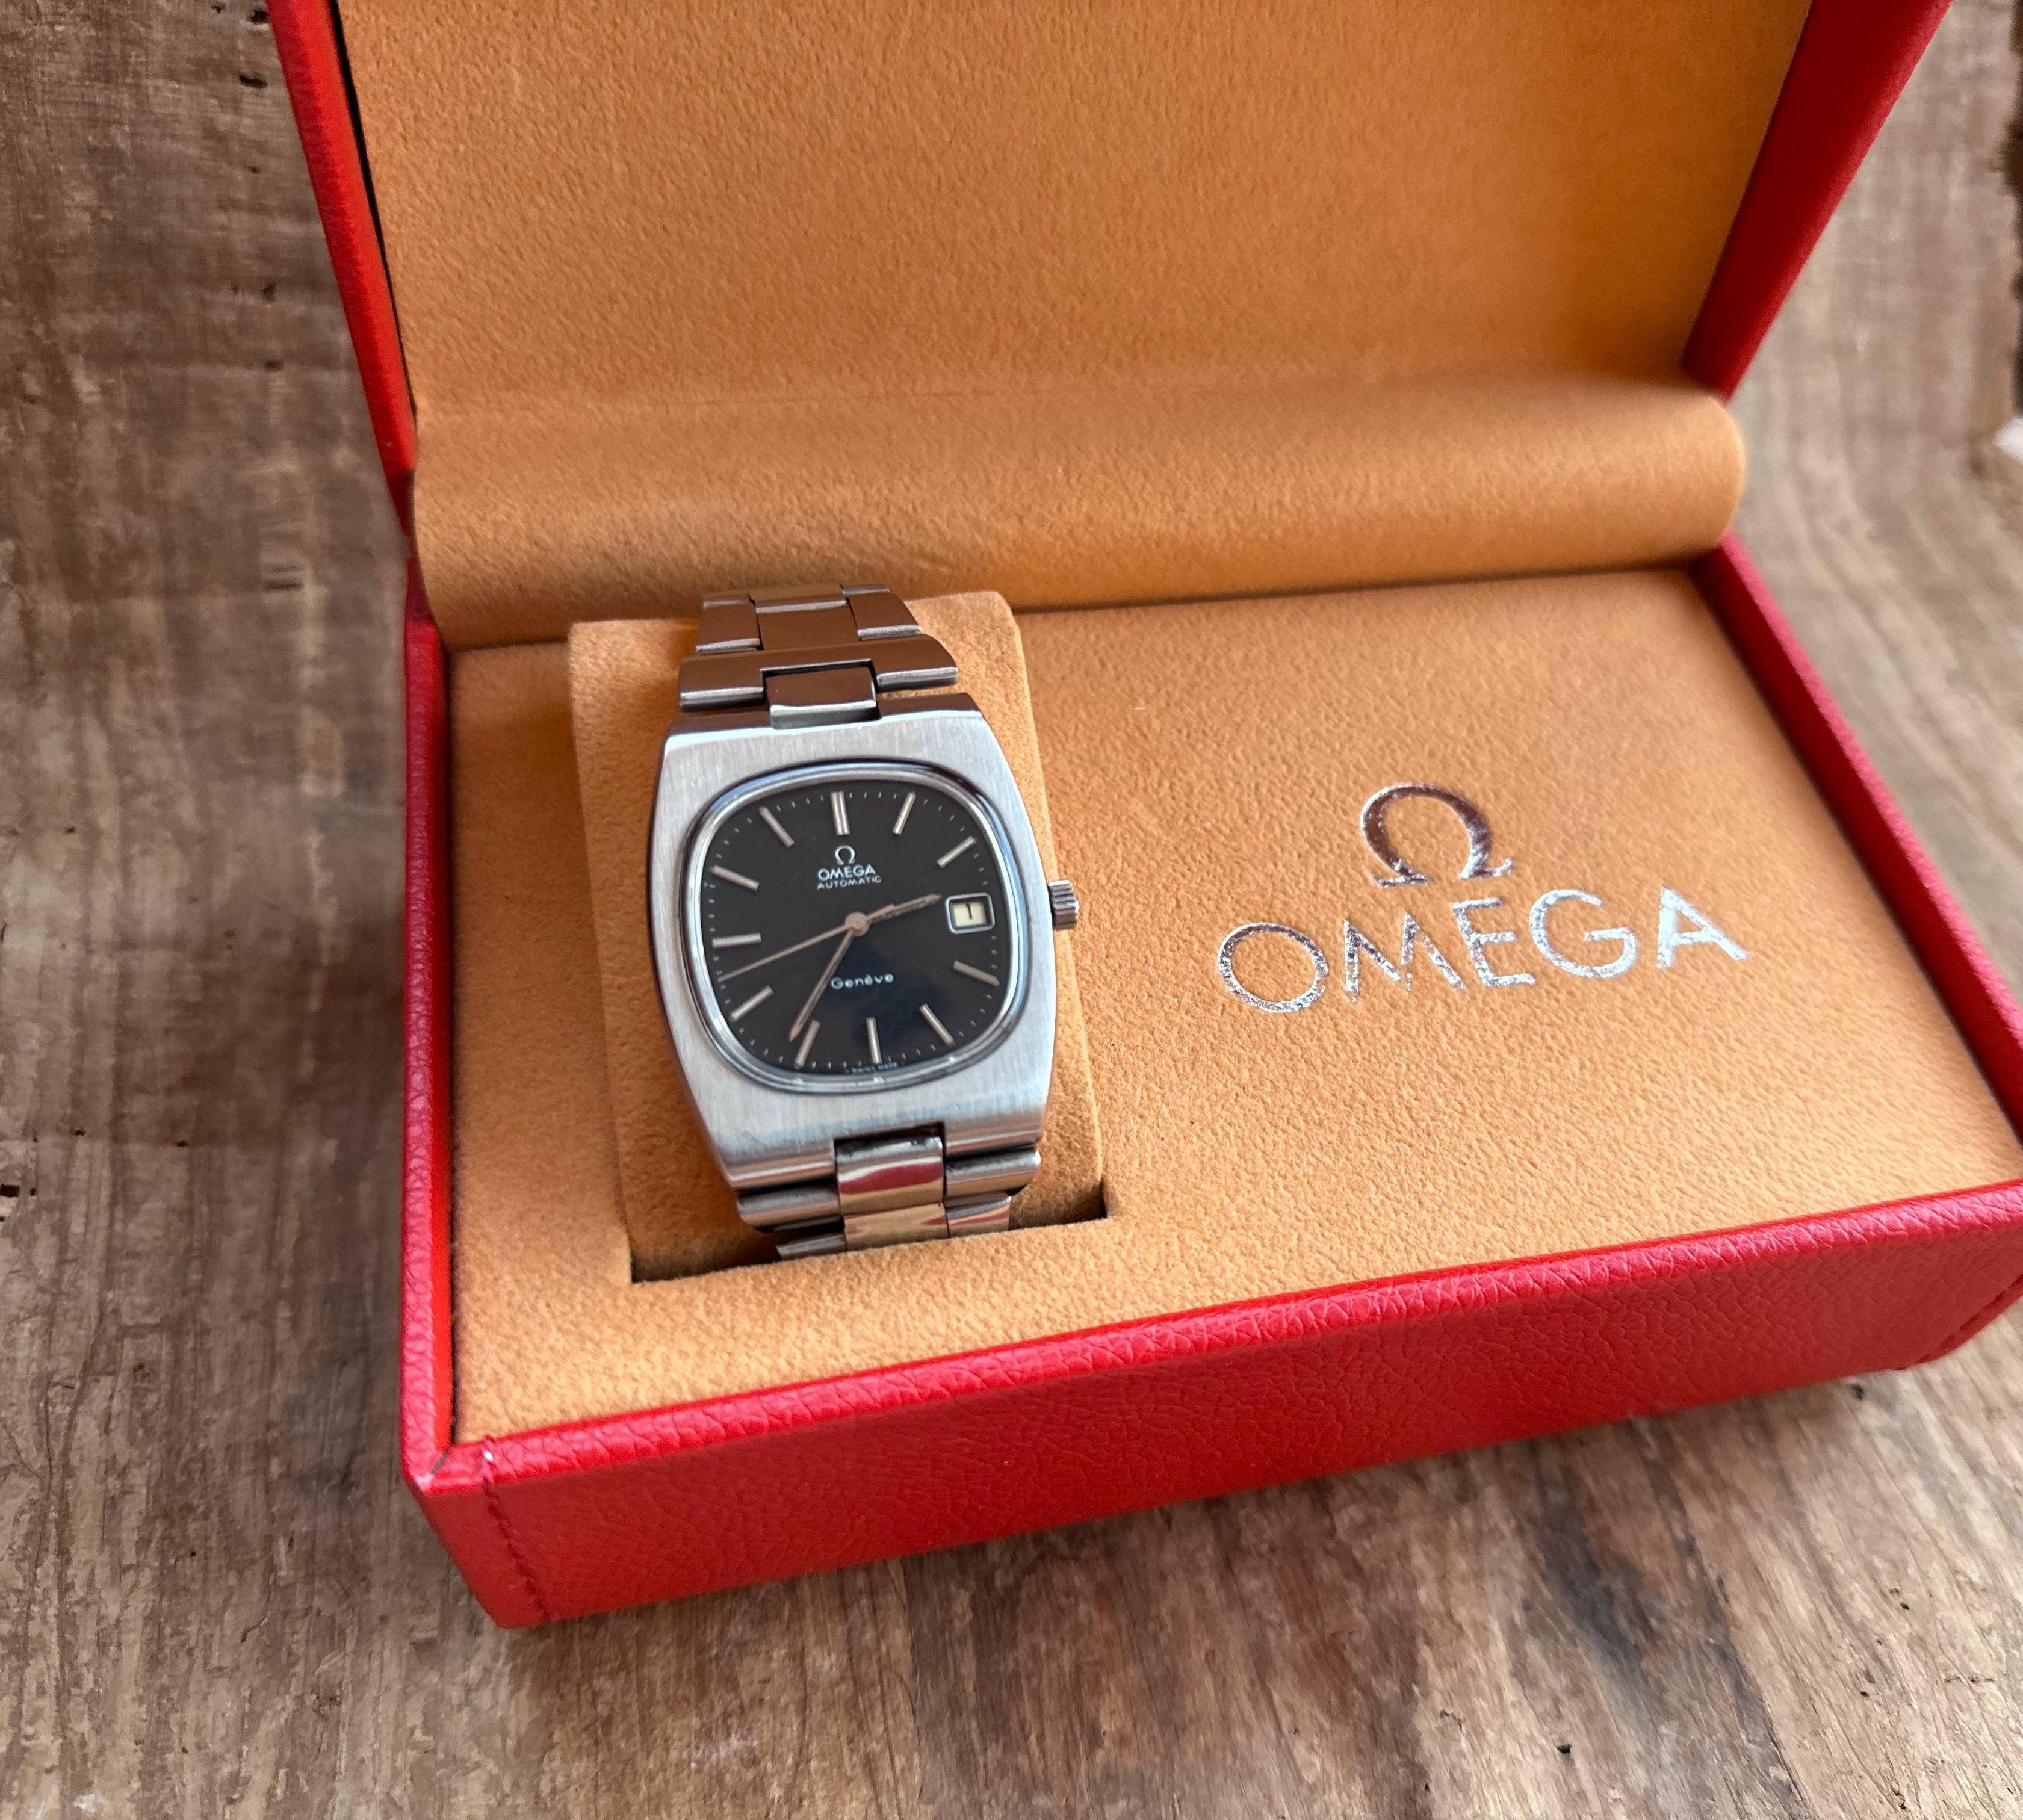 Brand: Omega

Model: Genève

Reference Number: 1660191

Country Of Manufacture: Switzerland

Movement: Automatic Cal 1012

Case Material: Stainless steel

Measurements : Case width: 36 mm. (without crown) x40mm

Band Type : Stainless steel

Band